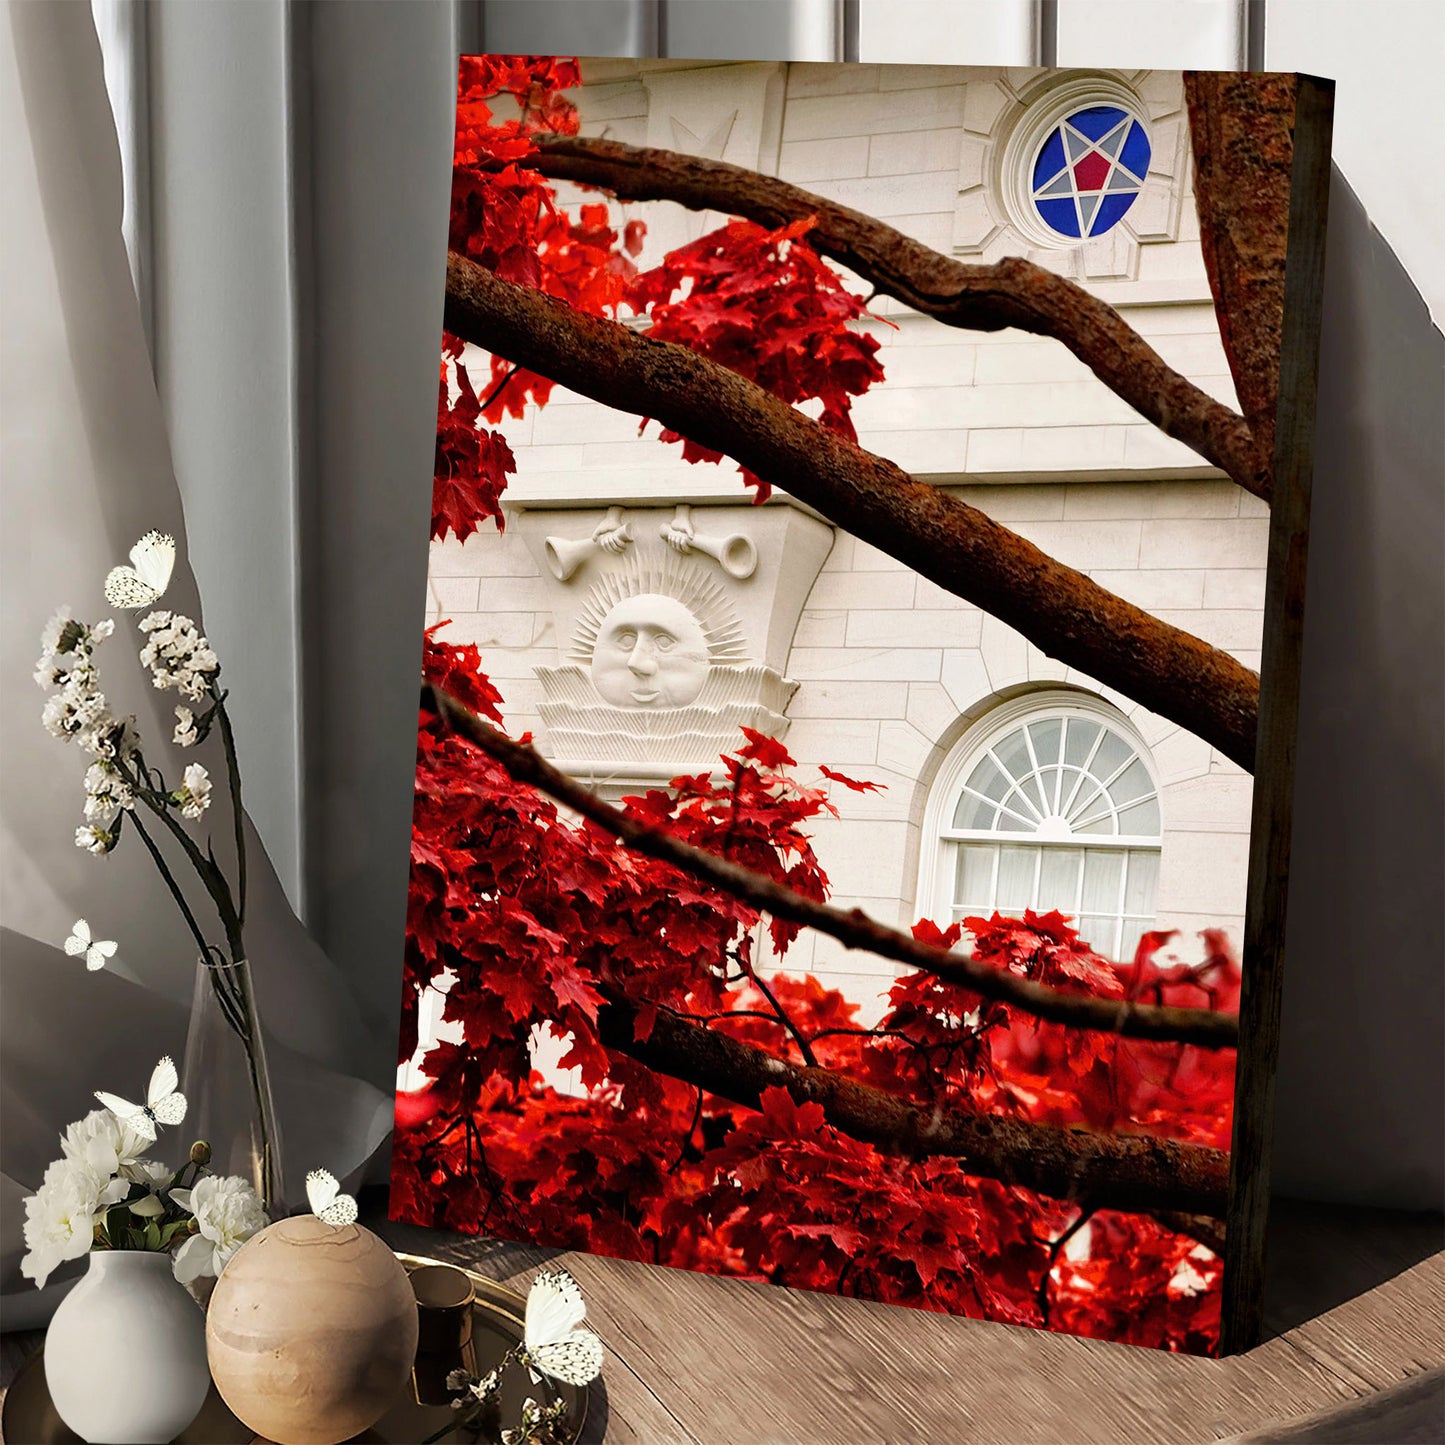 Nauvoo Temple Red Leaves Vertical Crop Canvas Pictures - Jesus Canvas Art - Christian Wall Art